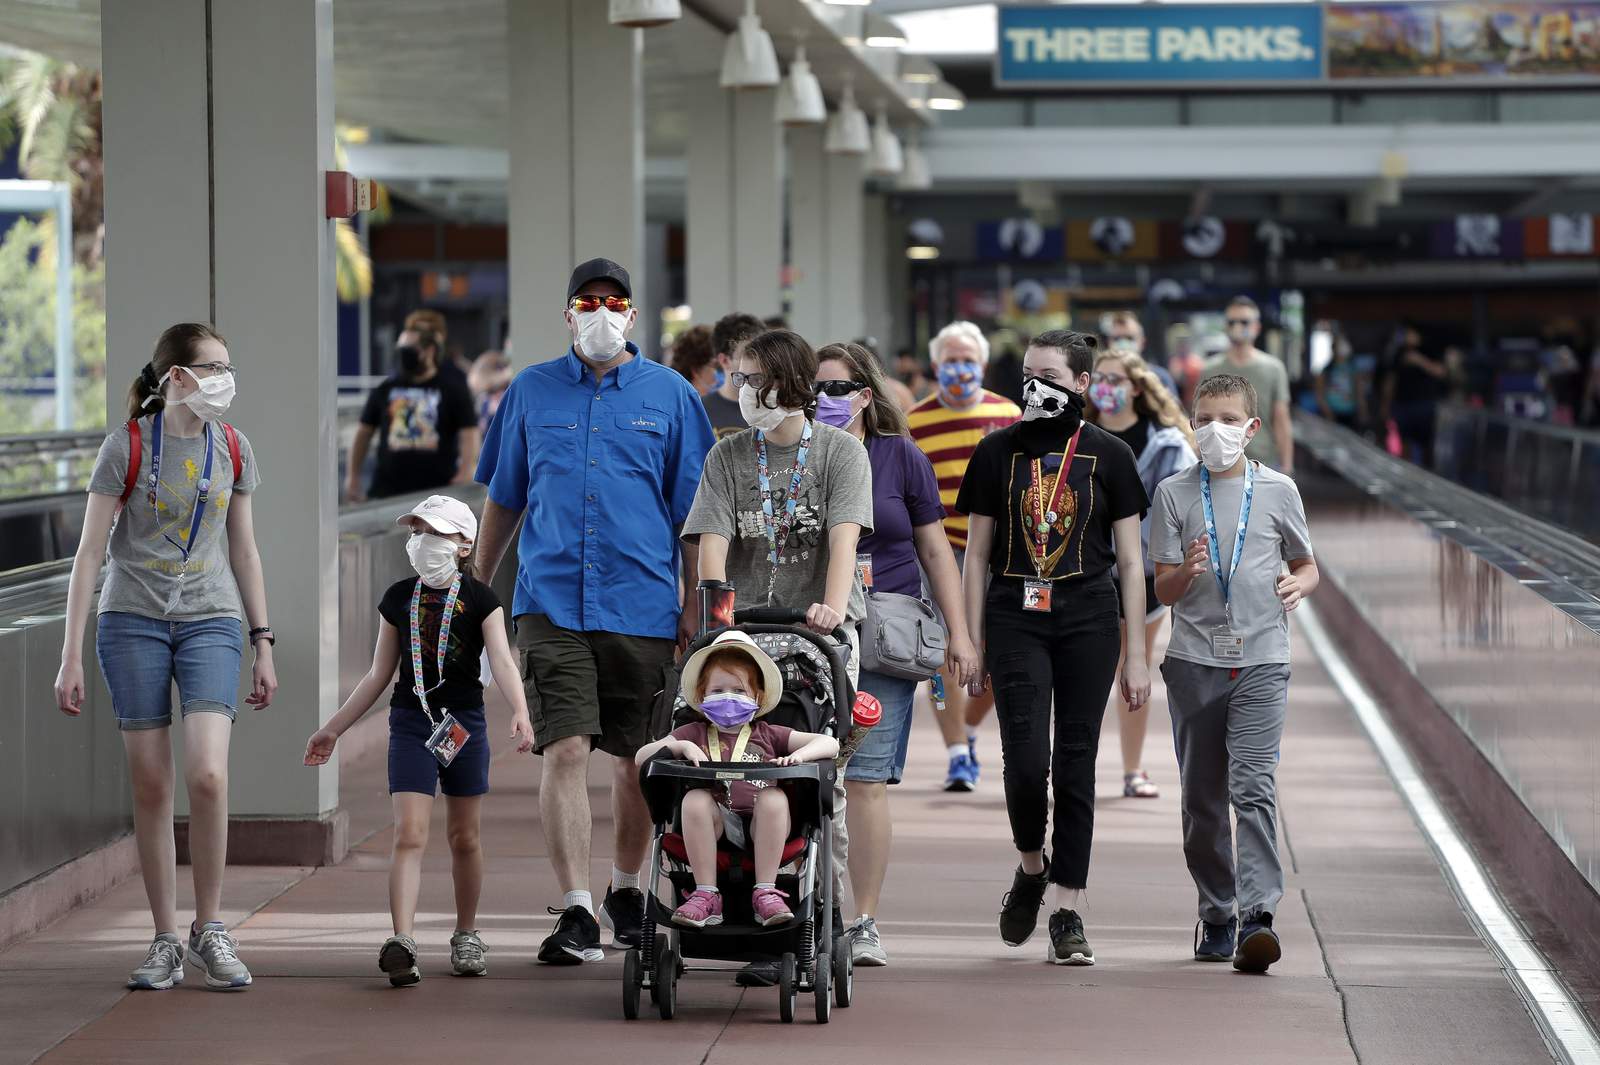 Healthcare workers encourage people to wear masks as Florida enters phase 2 of reopening